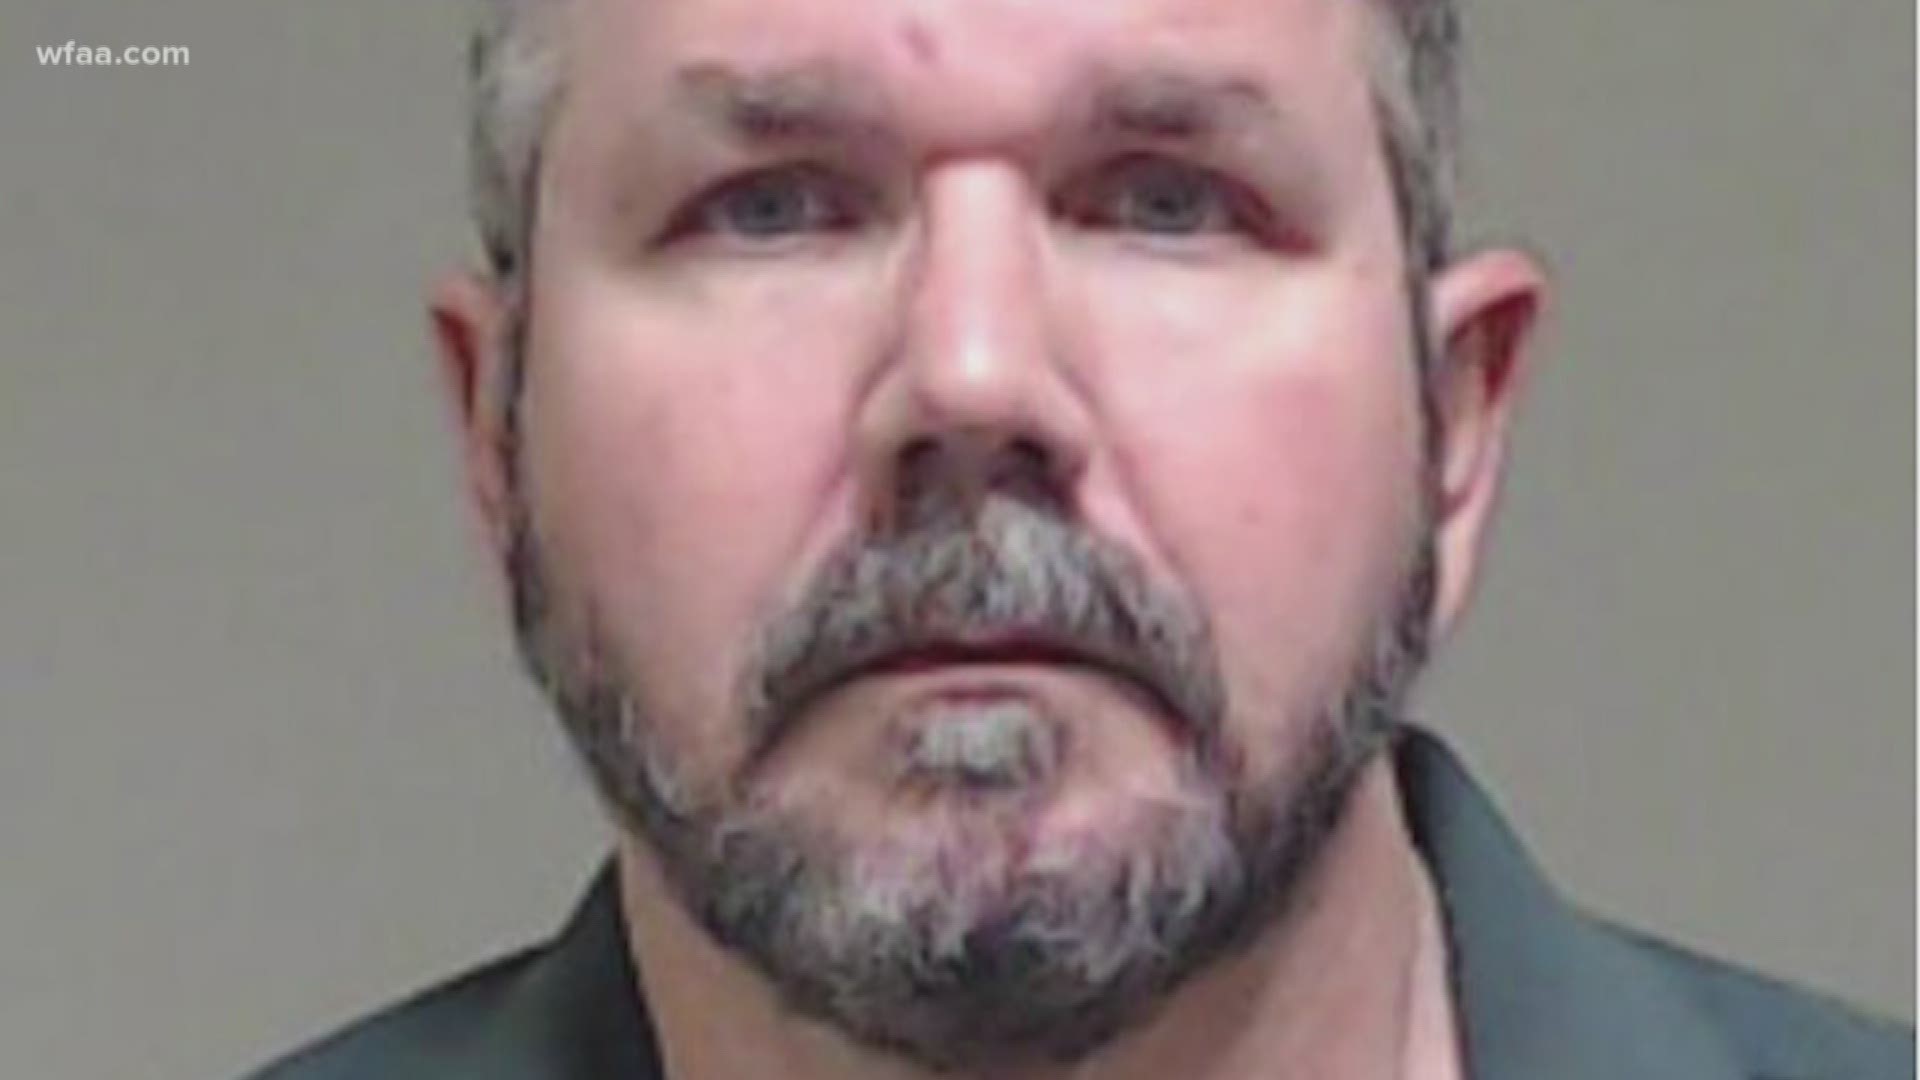 The assistant principal of Van Alstyne Middle School was arrested Tuesday on a charge of continuous sexual abuse of a child, Collin County jail records show.